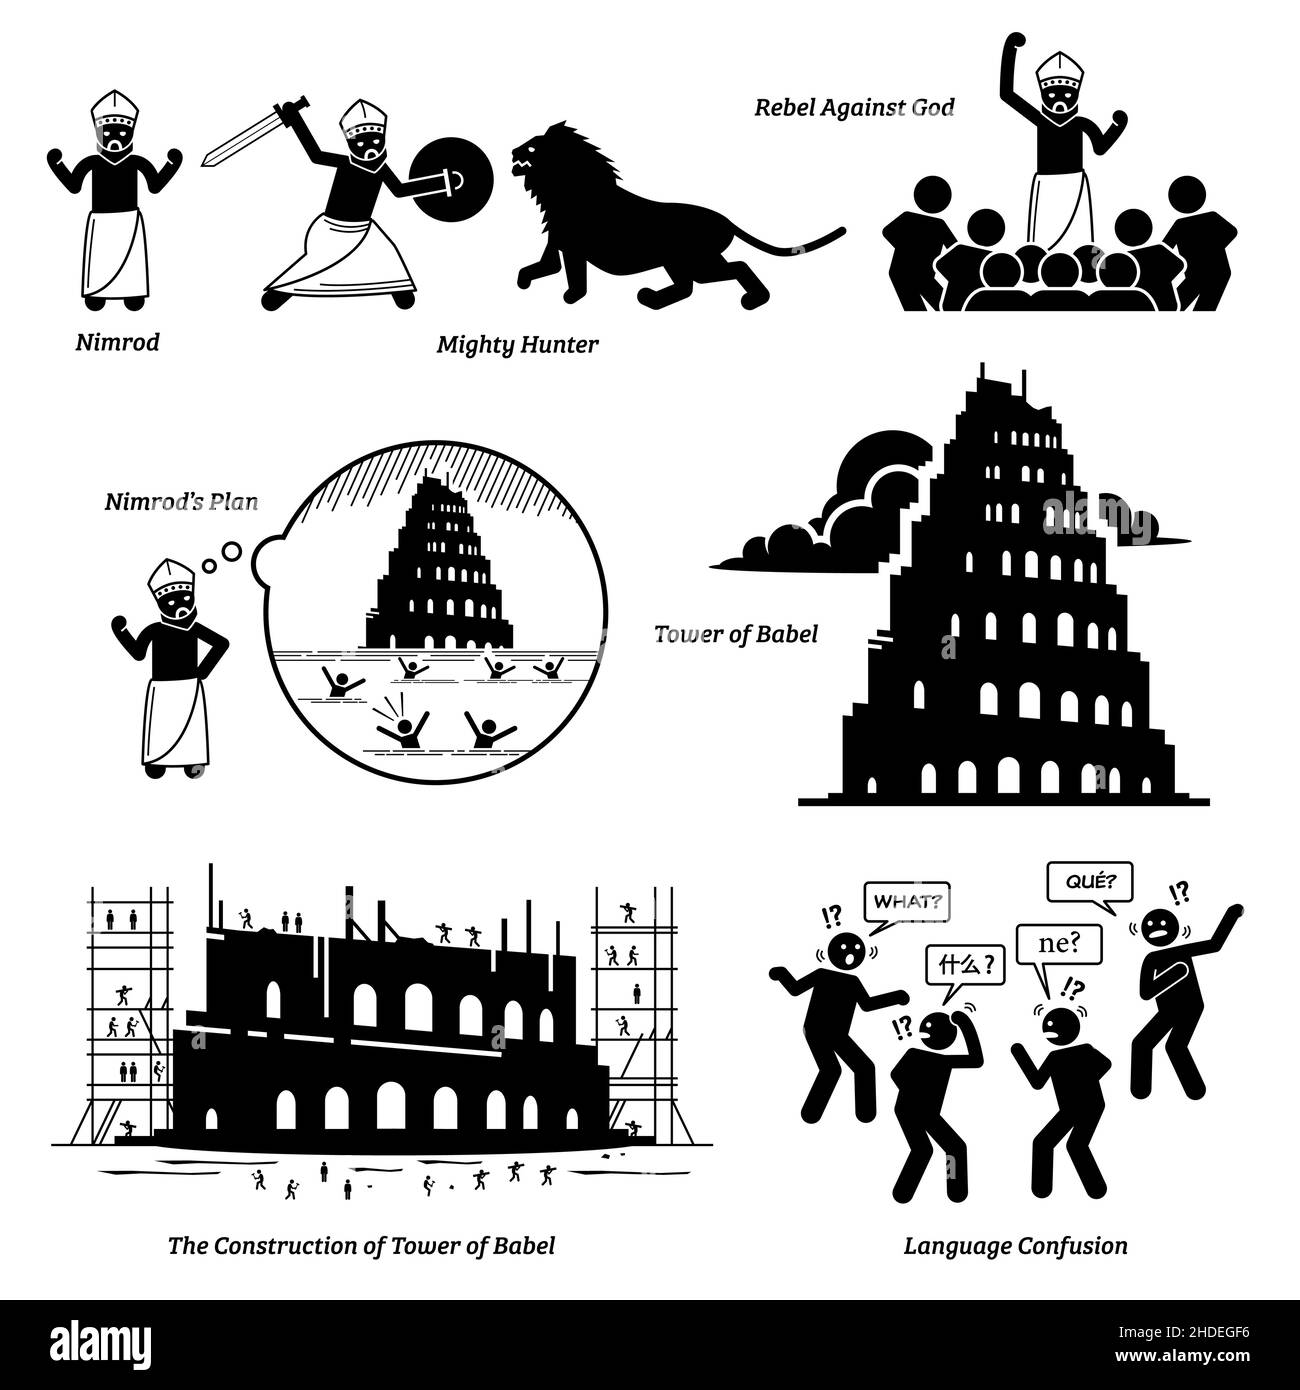 Nimrod and Tower of Babel bible biblical story. Vector illustrations depict King Nimrod as a mighty hunter, and rebel against God by building the Towe Stock Vector